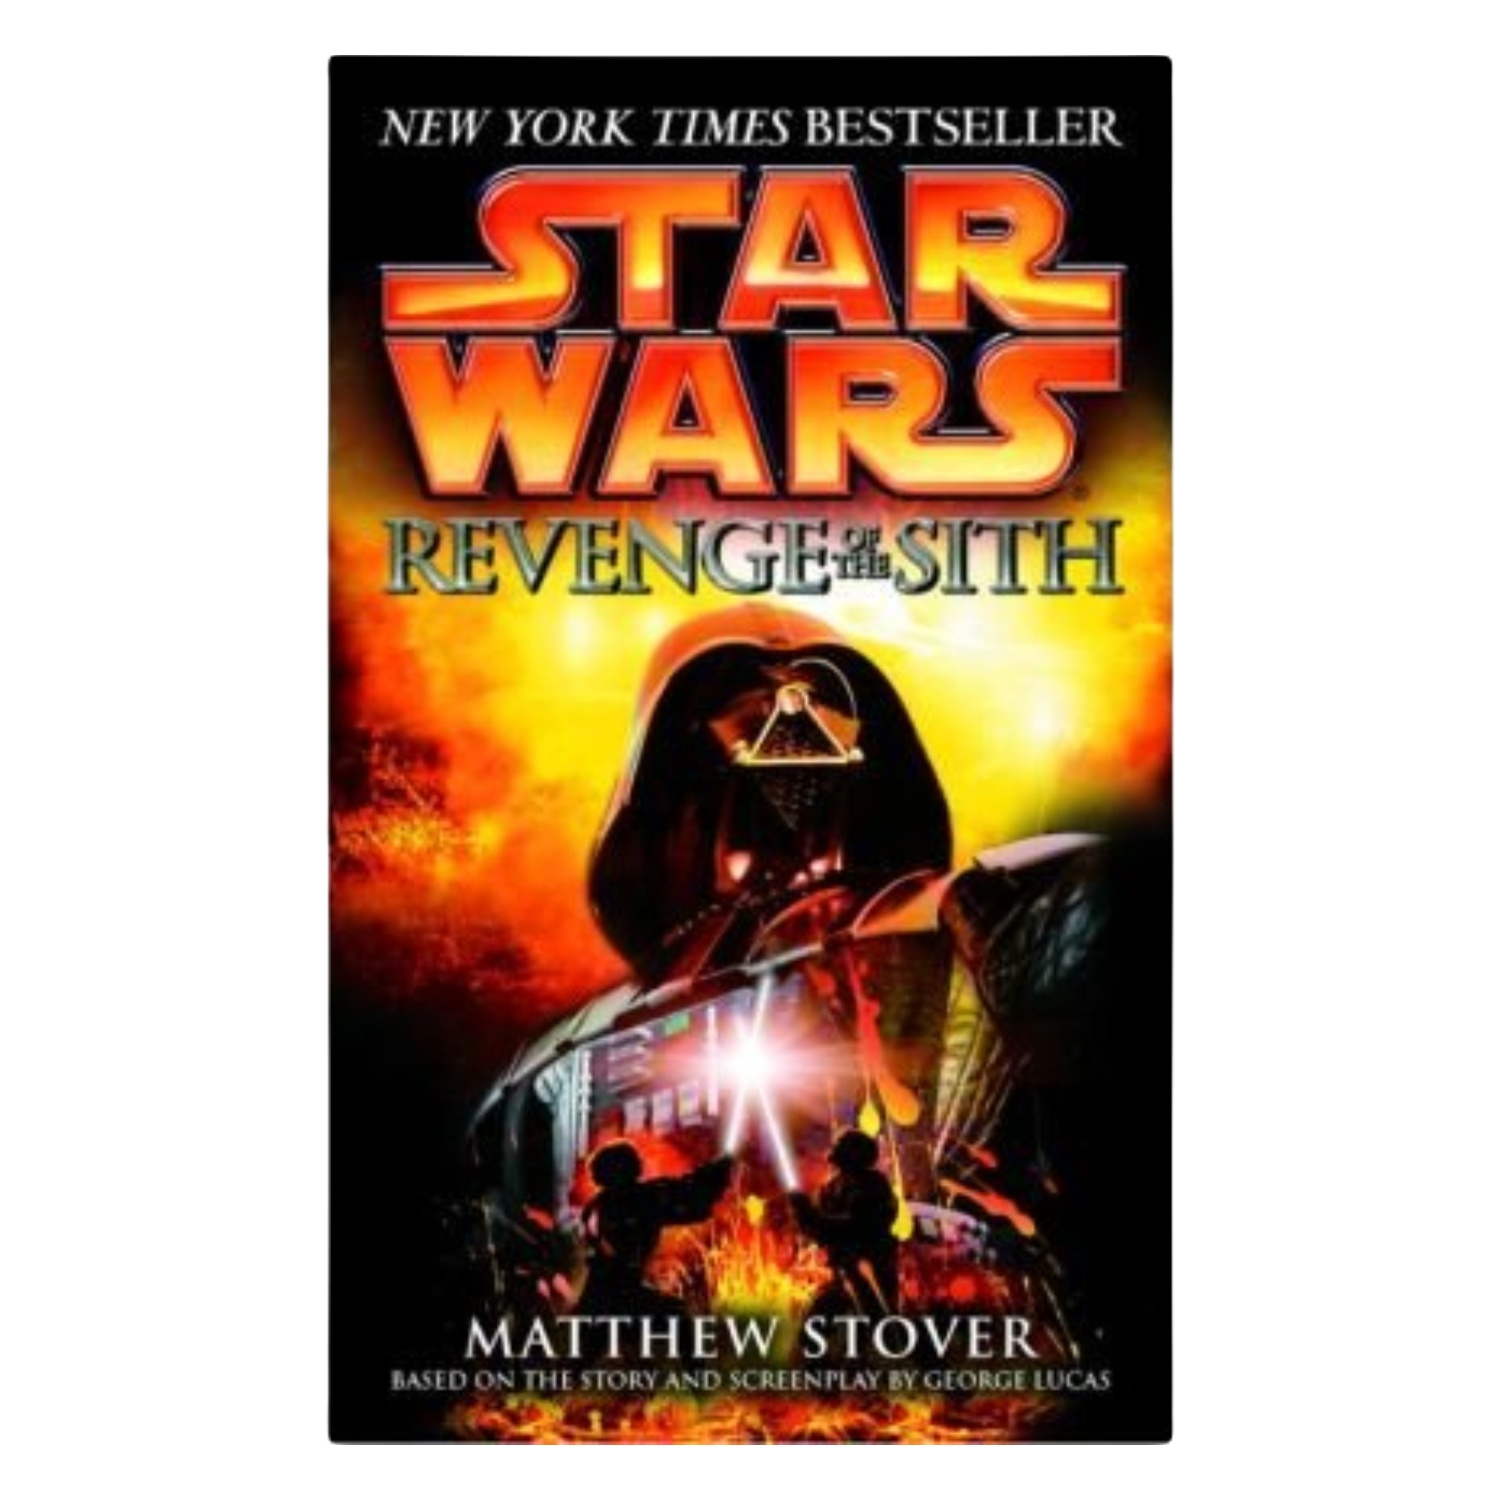 Star Wars: Revenge of the Sith by Matthew Stover (2005)